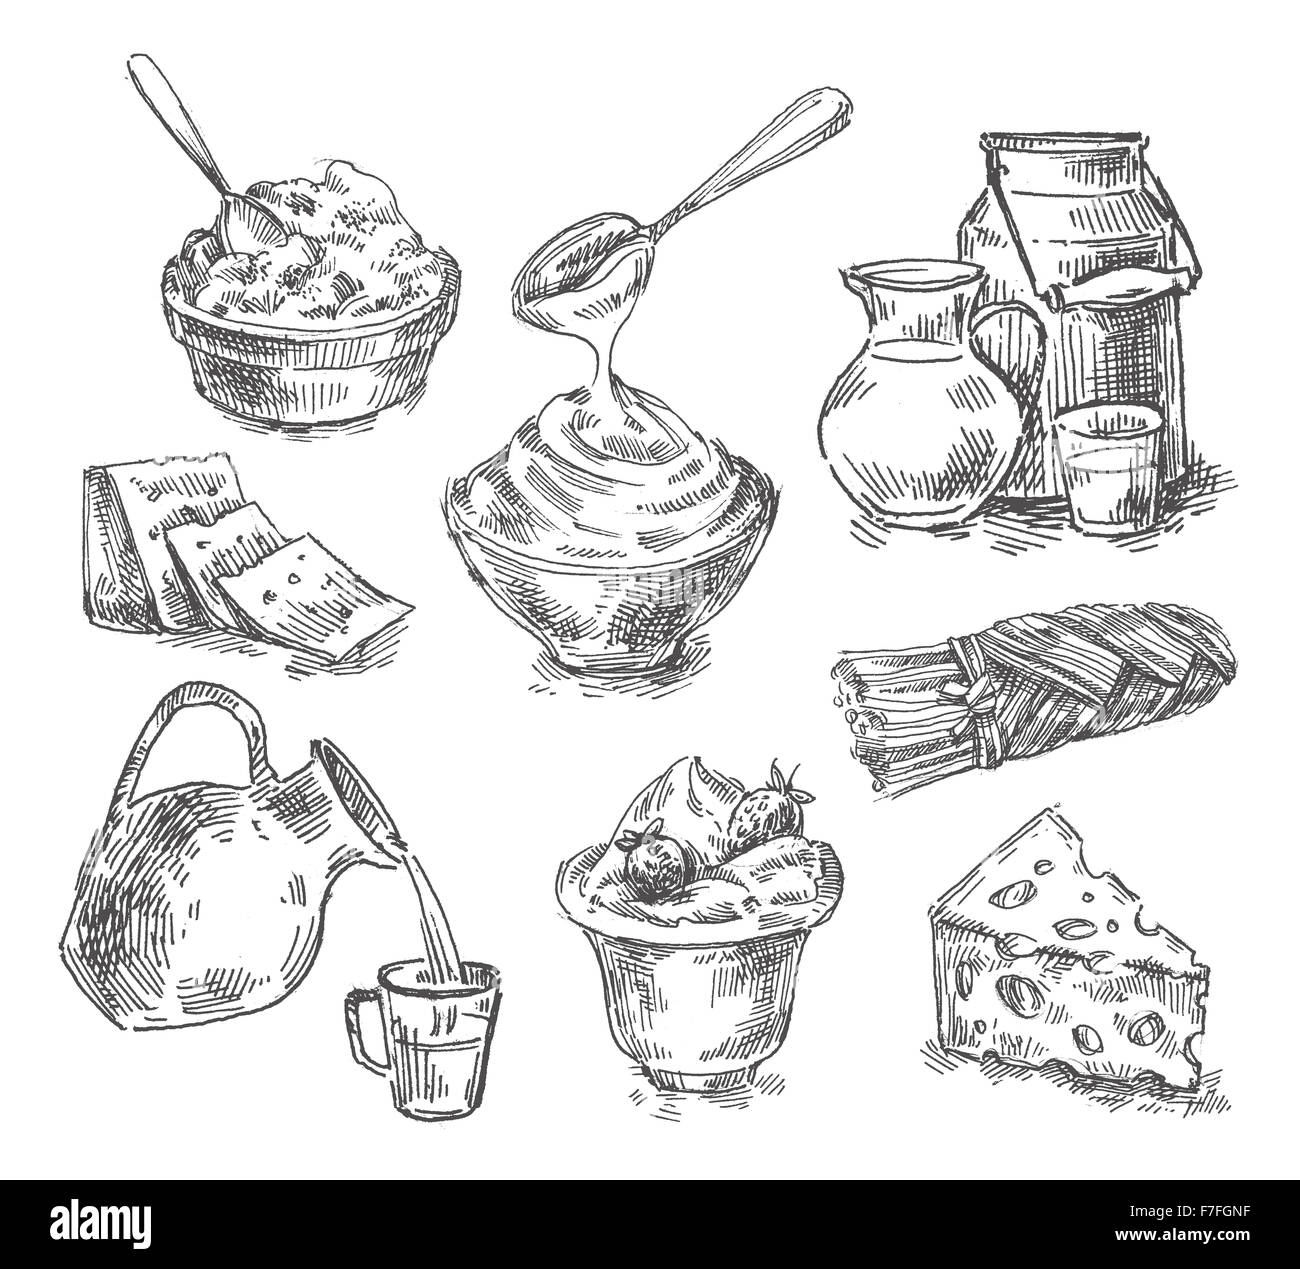 hand drawn dairy products, milk, cheese. sketch Stock Photo